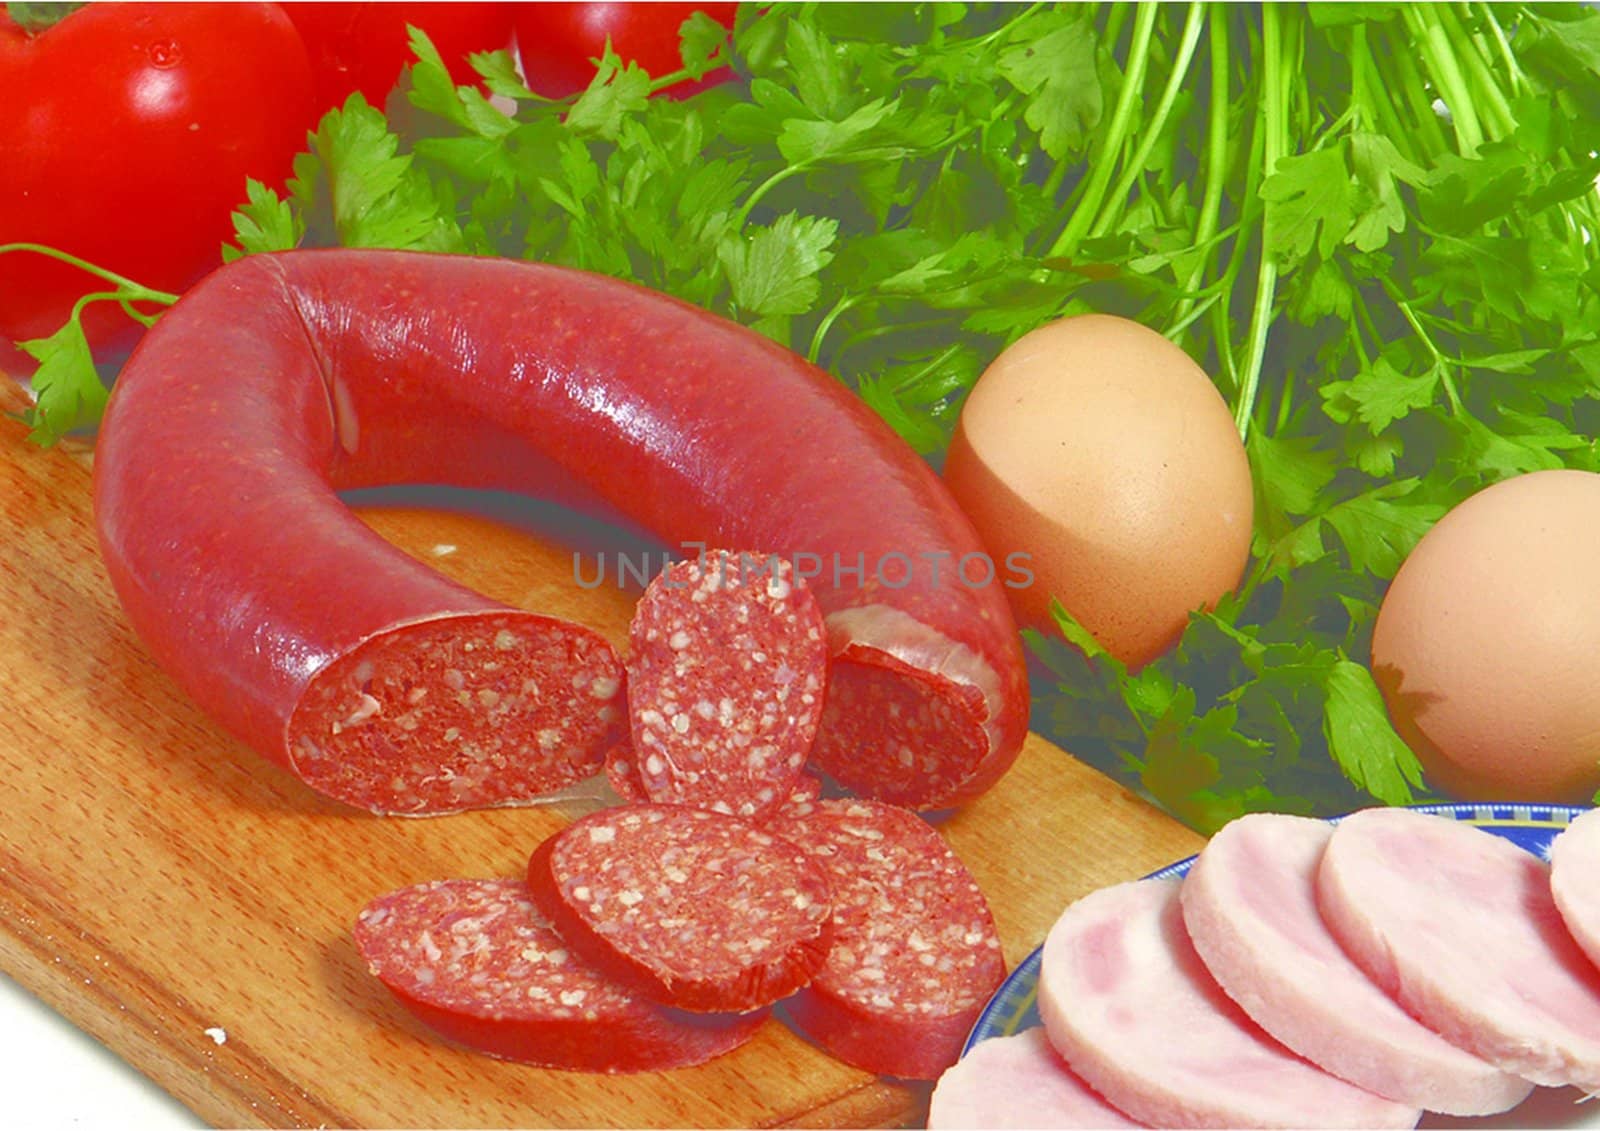 sausage on a wooden board by Baltus